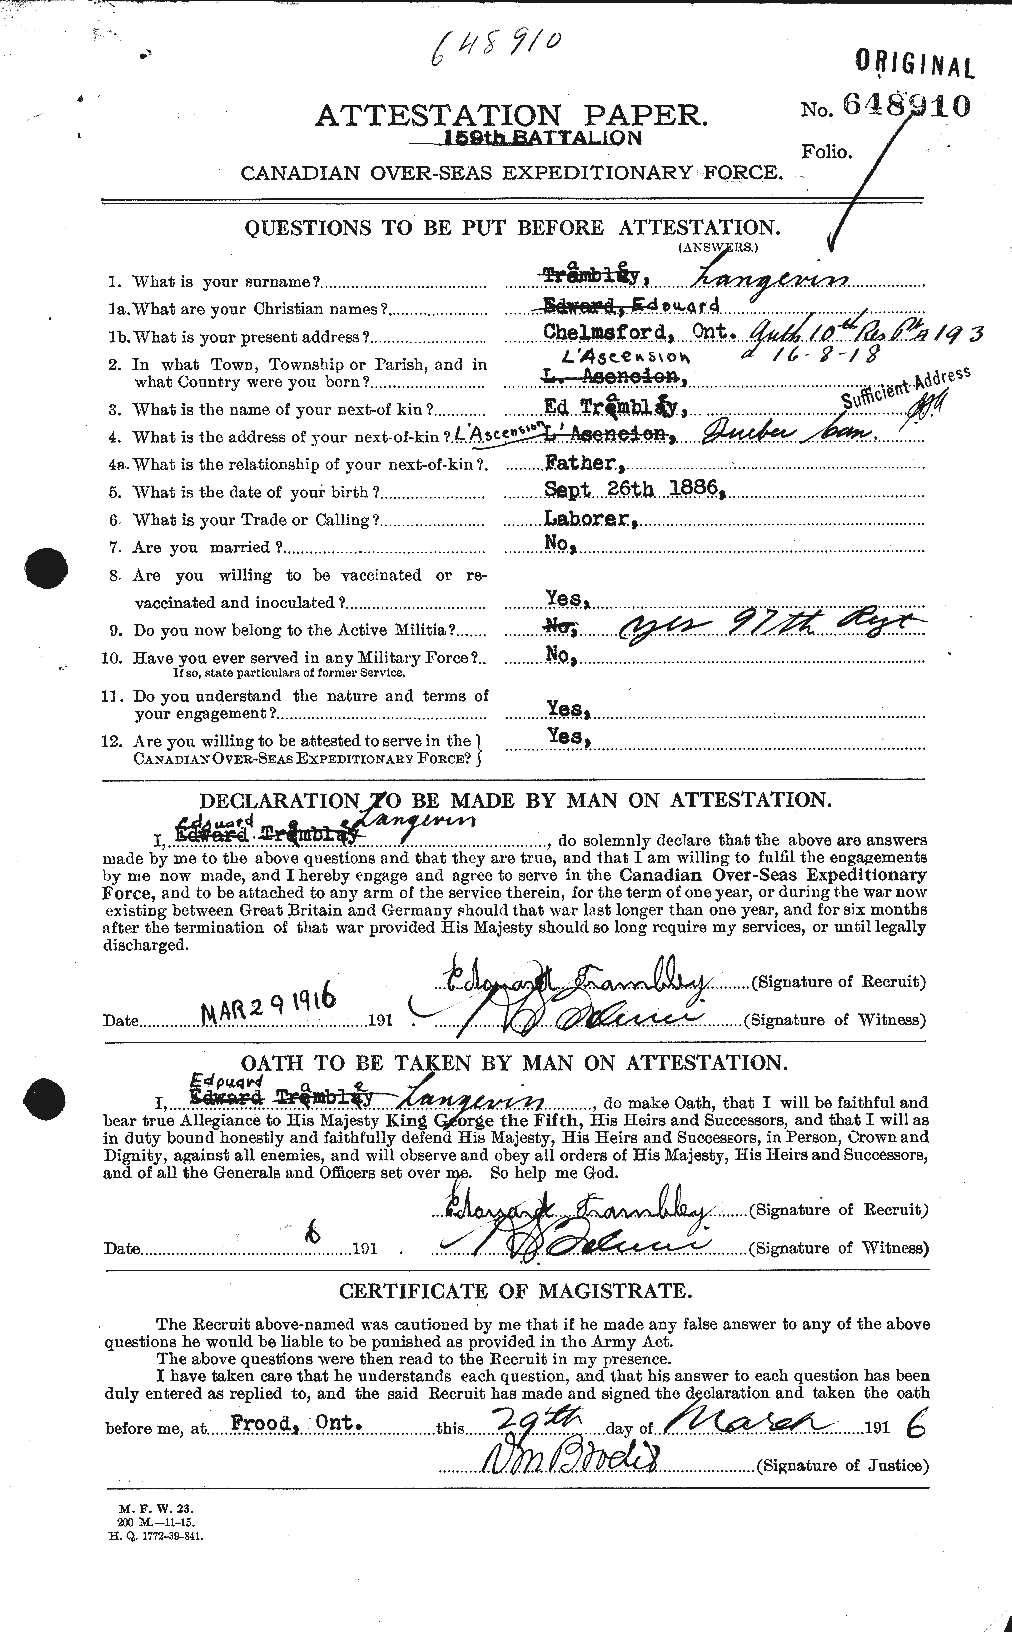 Personnel Records of the First World War - CEF 447579a